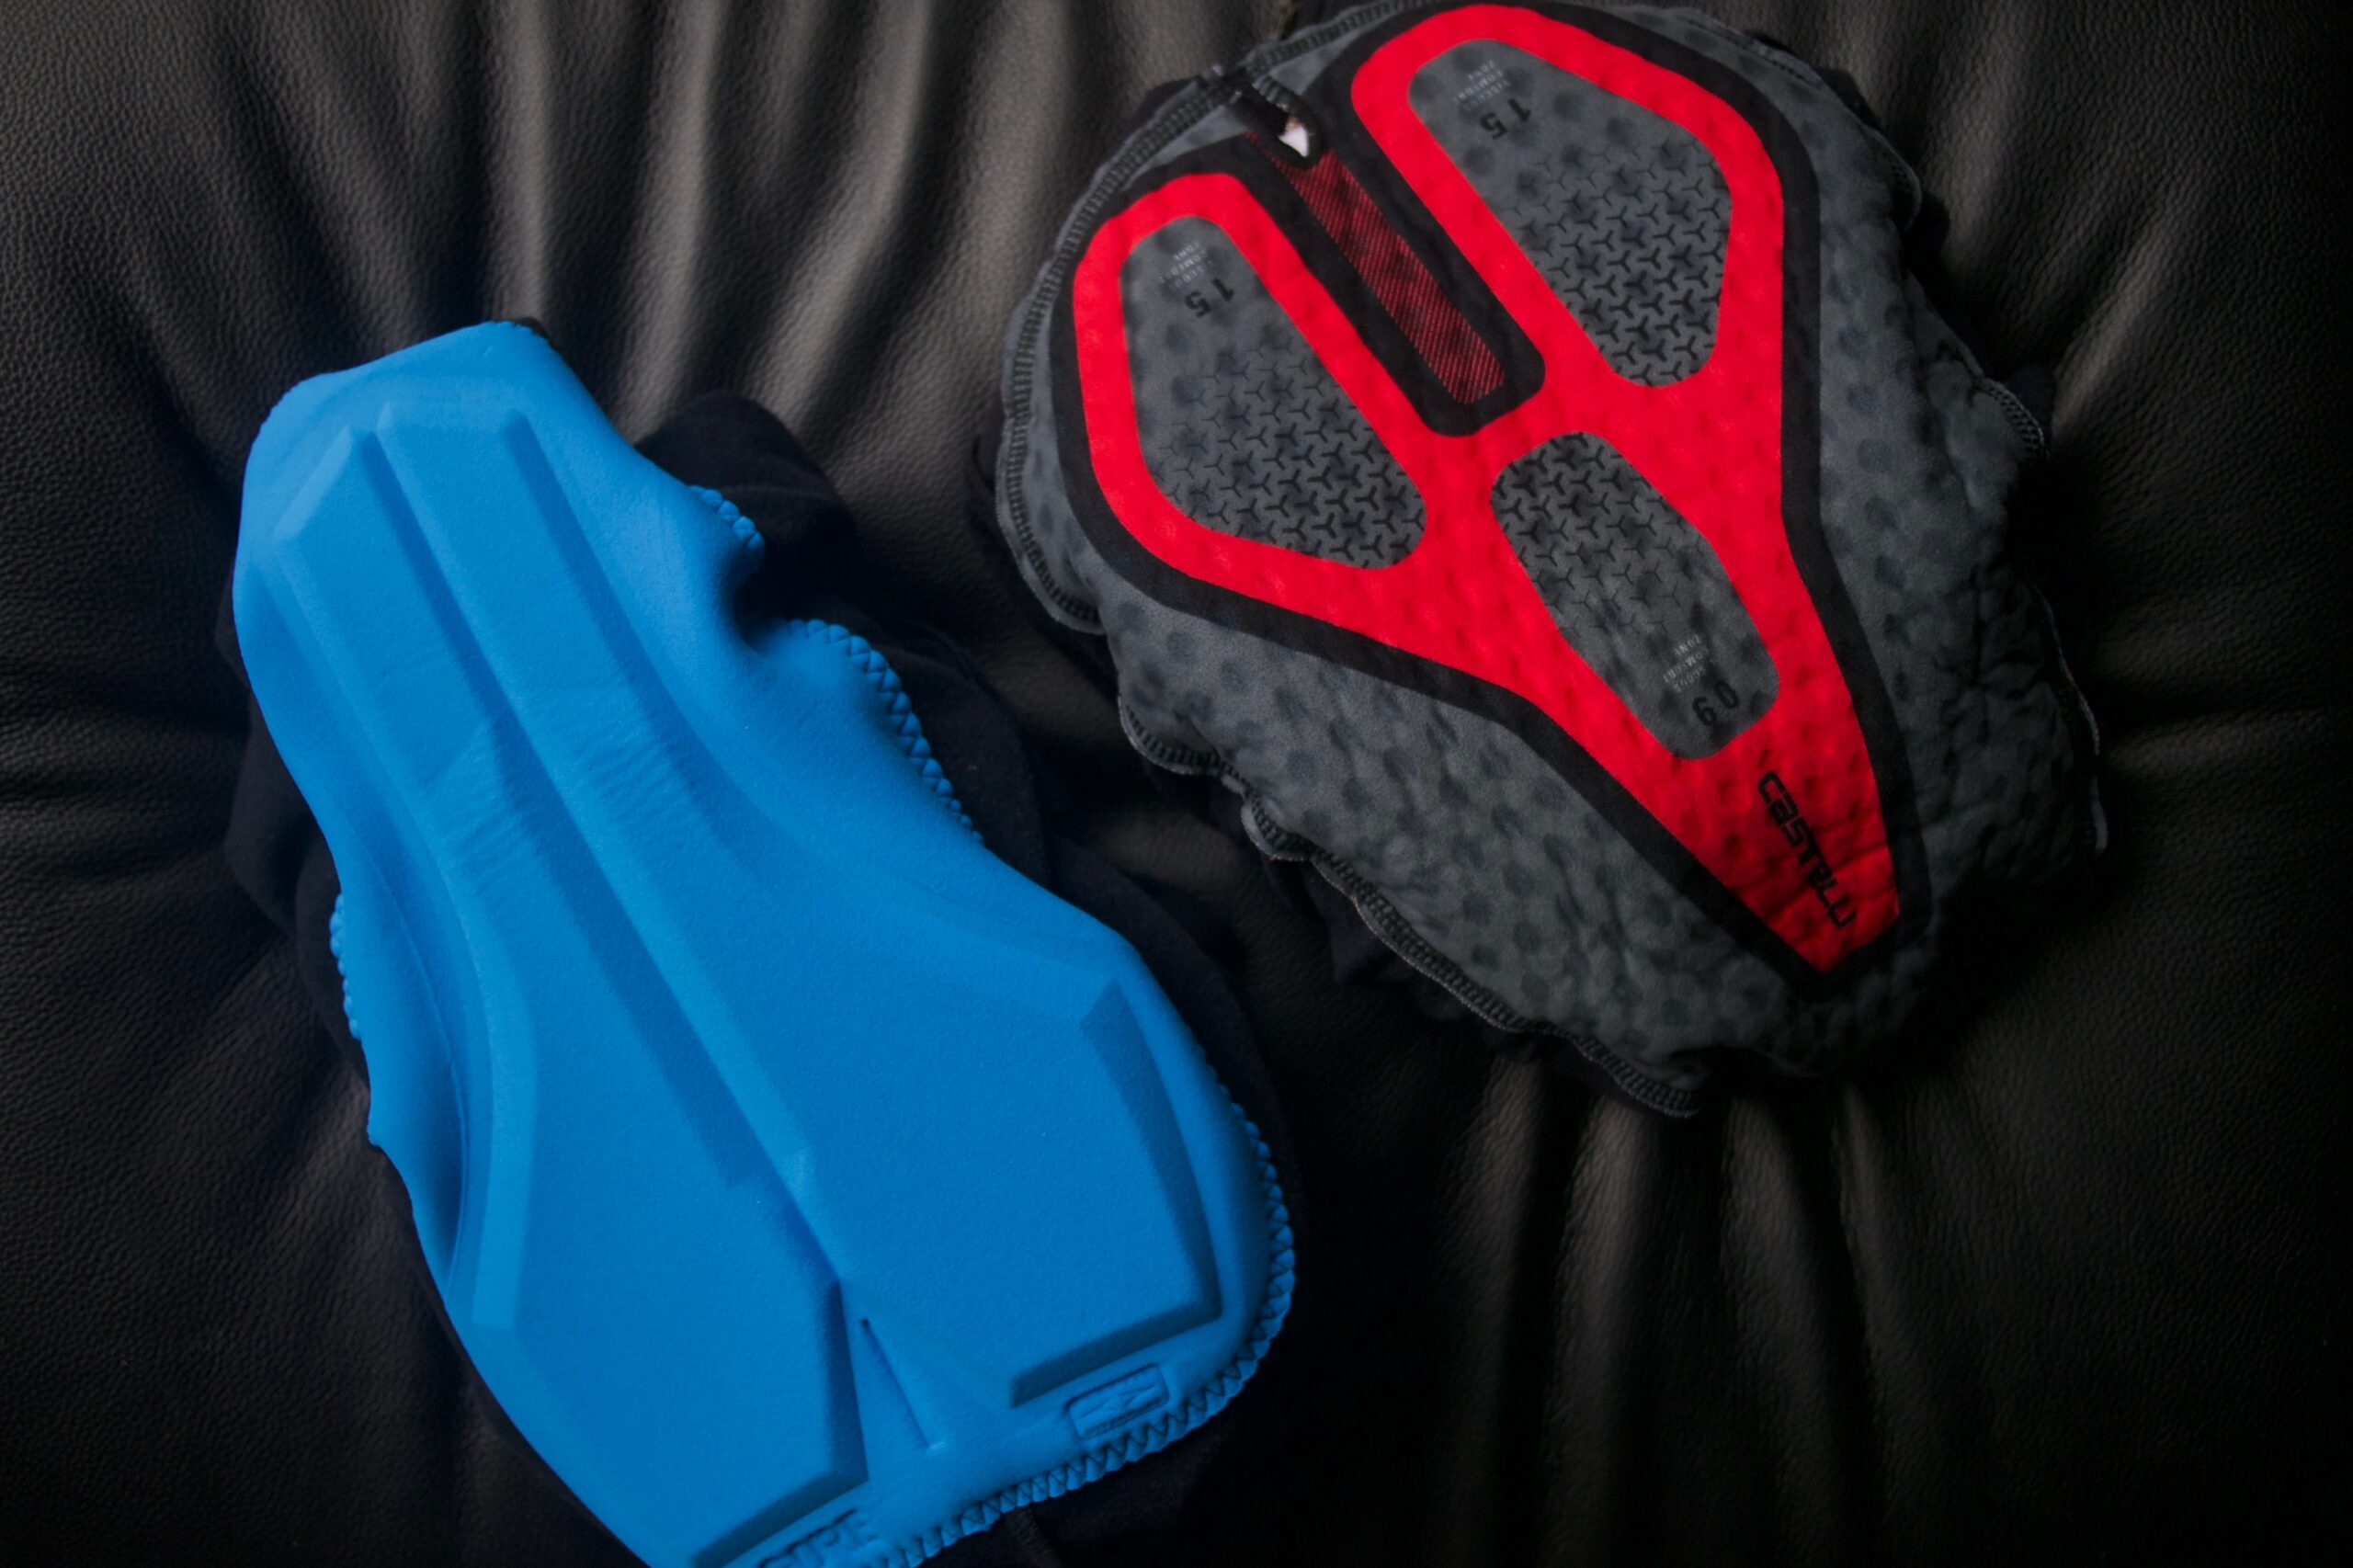 Comparison shot of two chamois pads from bib tights we tested